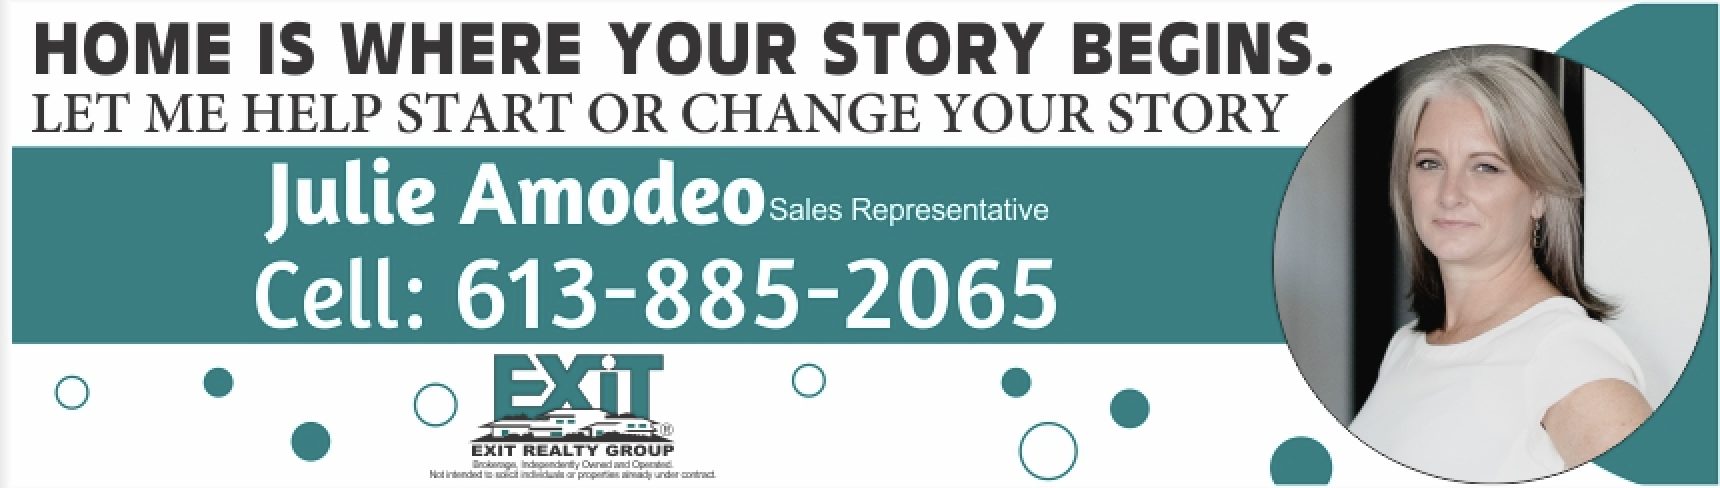 Julie Amodeo - Sales Representative - Exit Realty Group